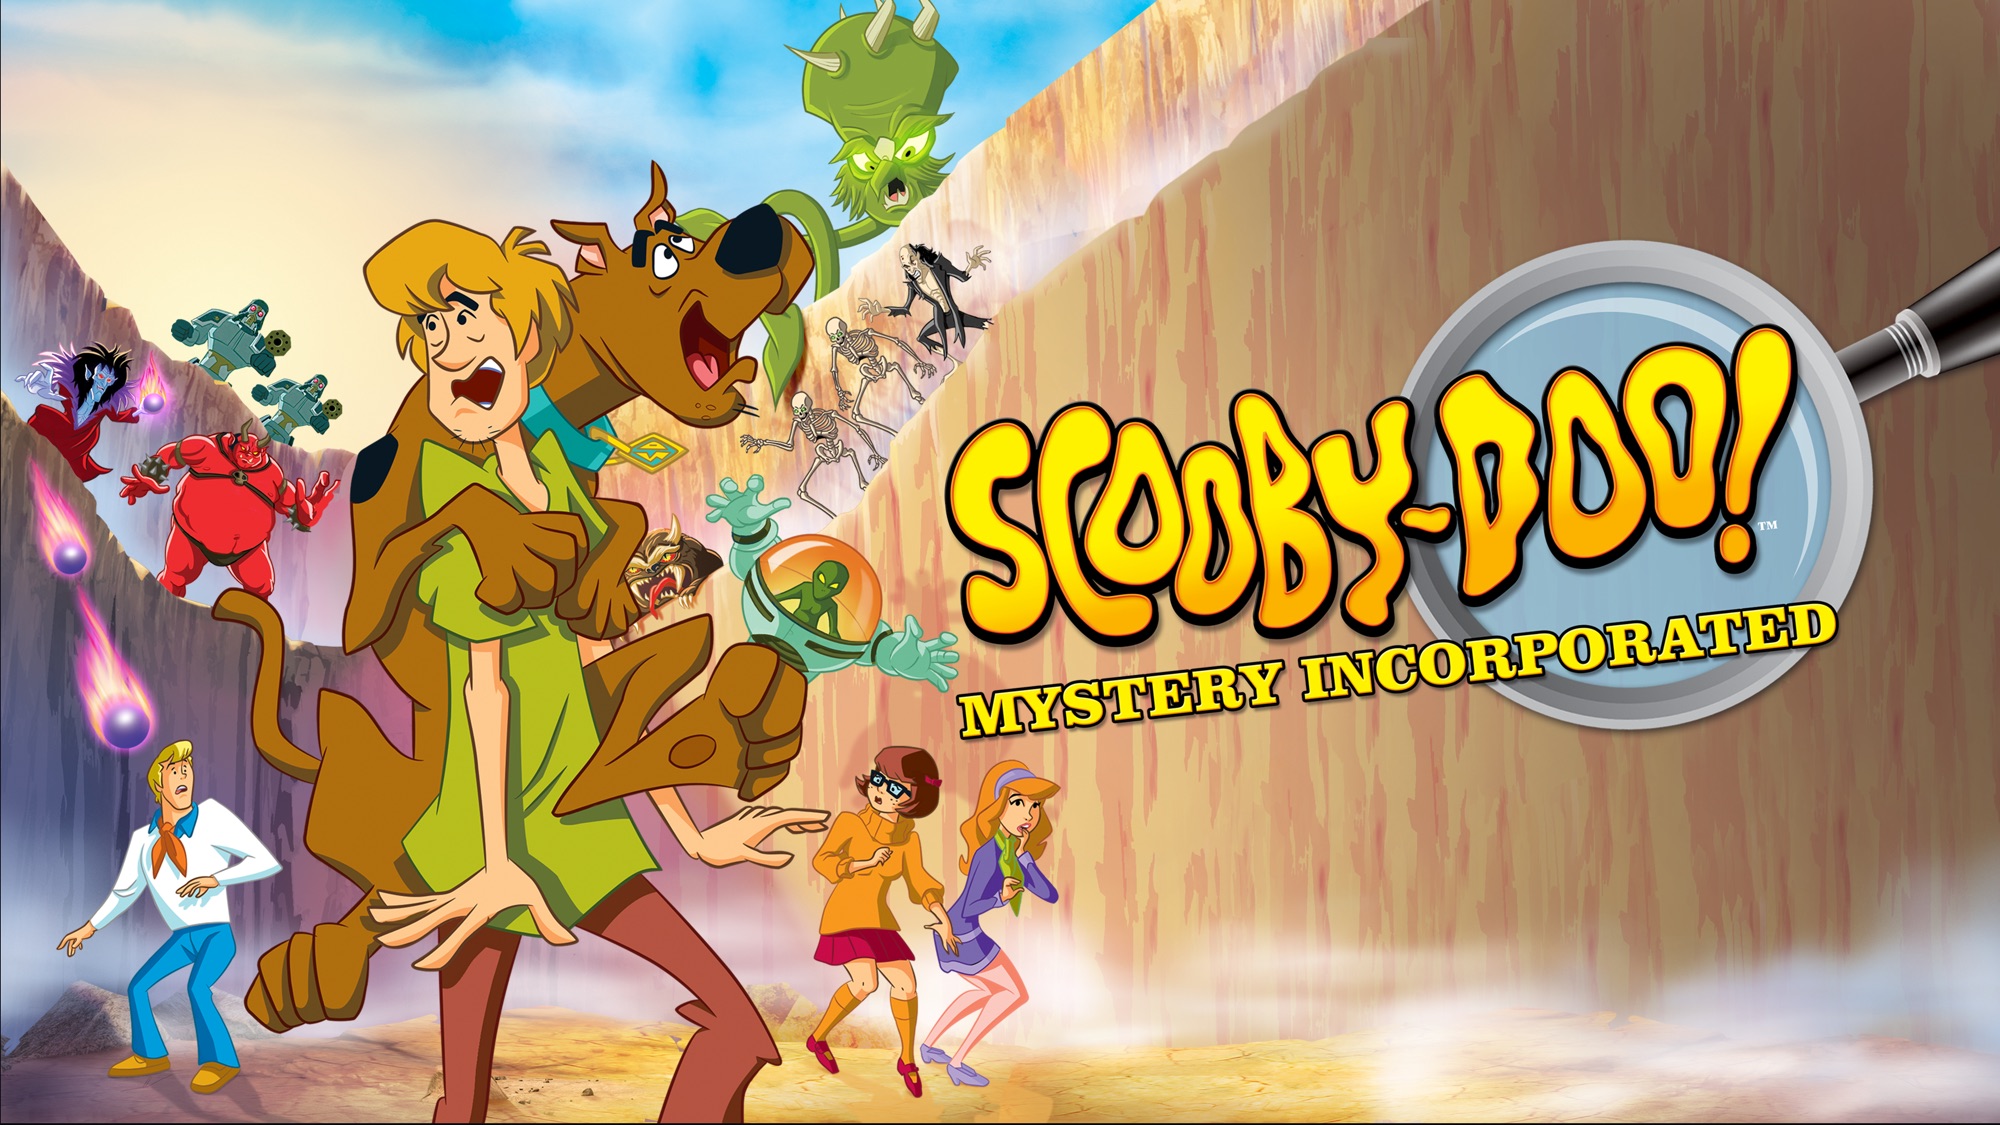 tv show, scooby doo! mystery incorporated, scooby doo